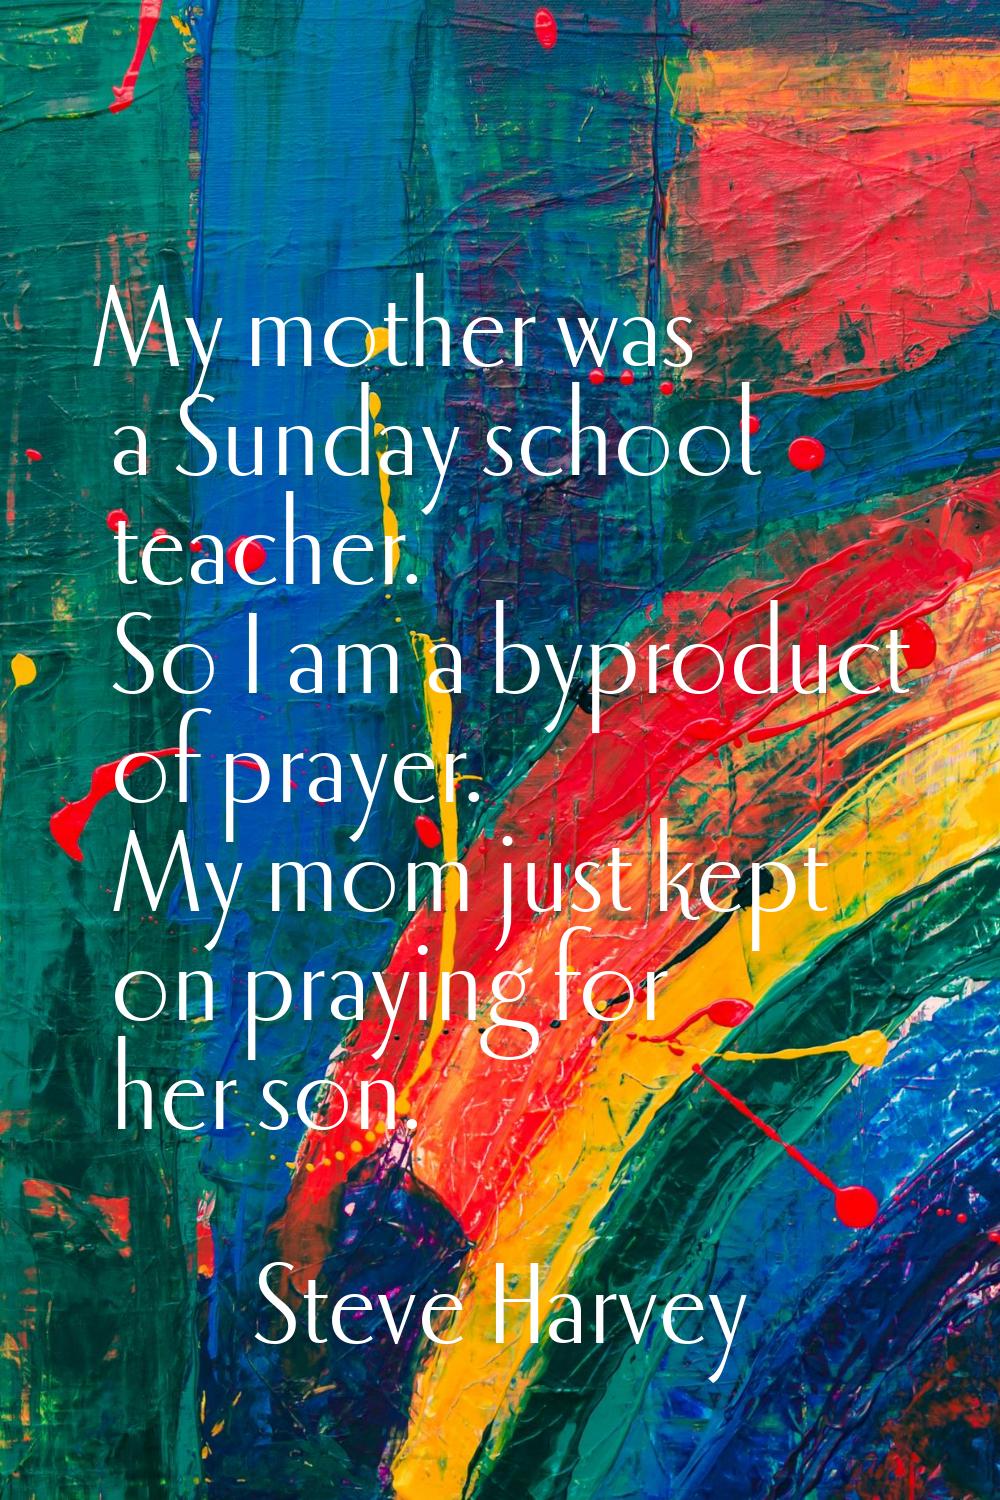 My mother was a Sunday school teacher. So I am a byproduct of prayer. My mom just kept on praying f